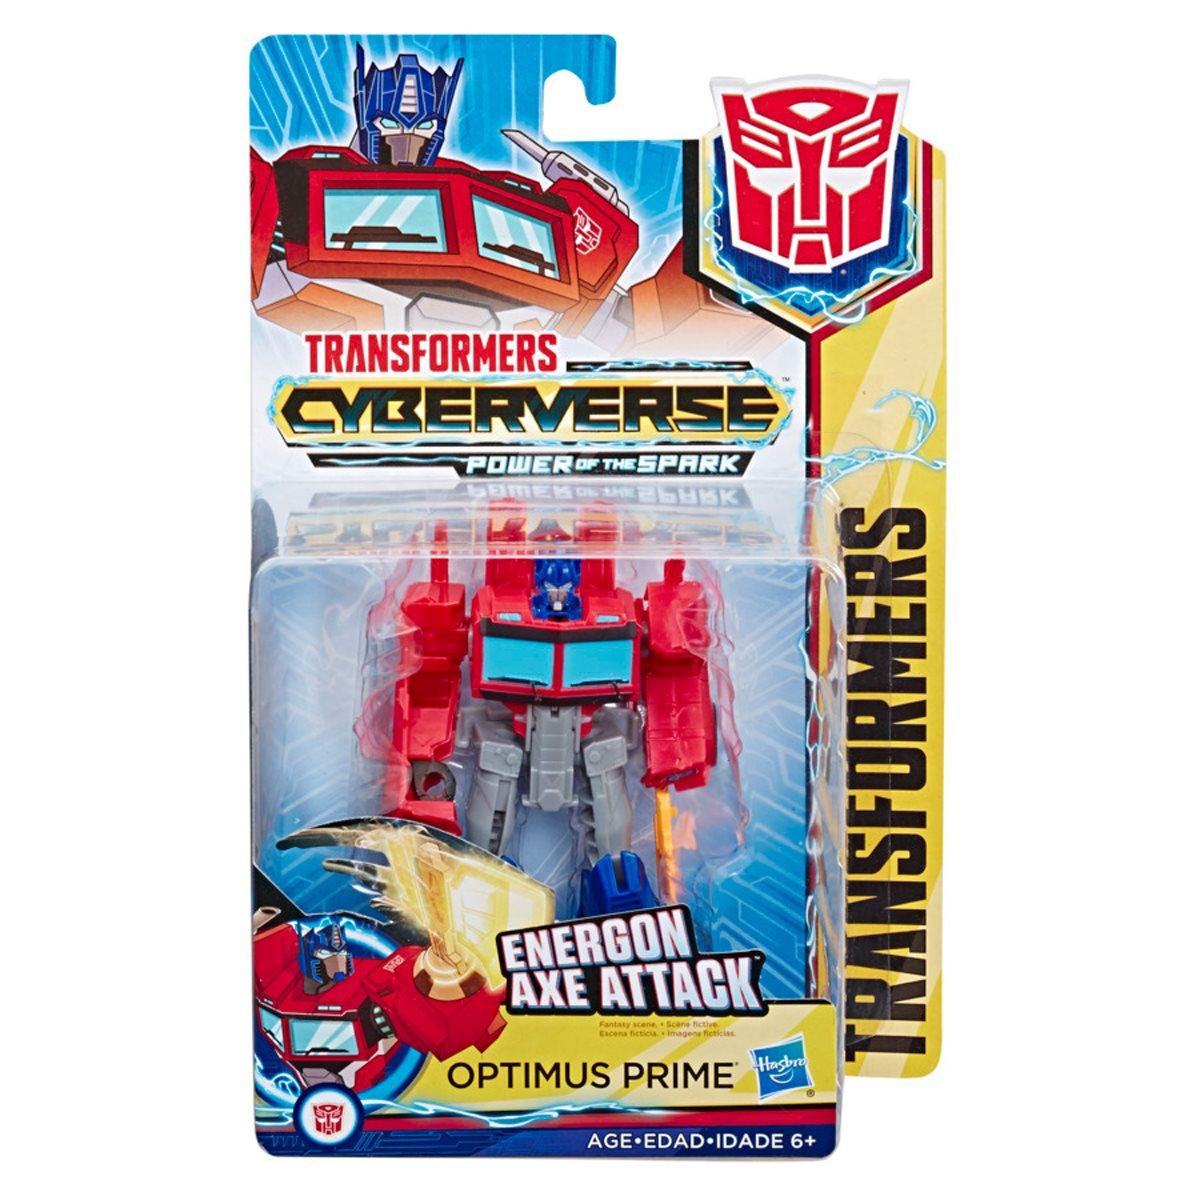 Transformers Cyberverse Action Attackers Warrior Class - Optimus Prime